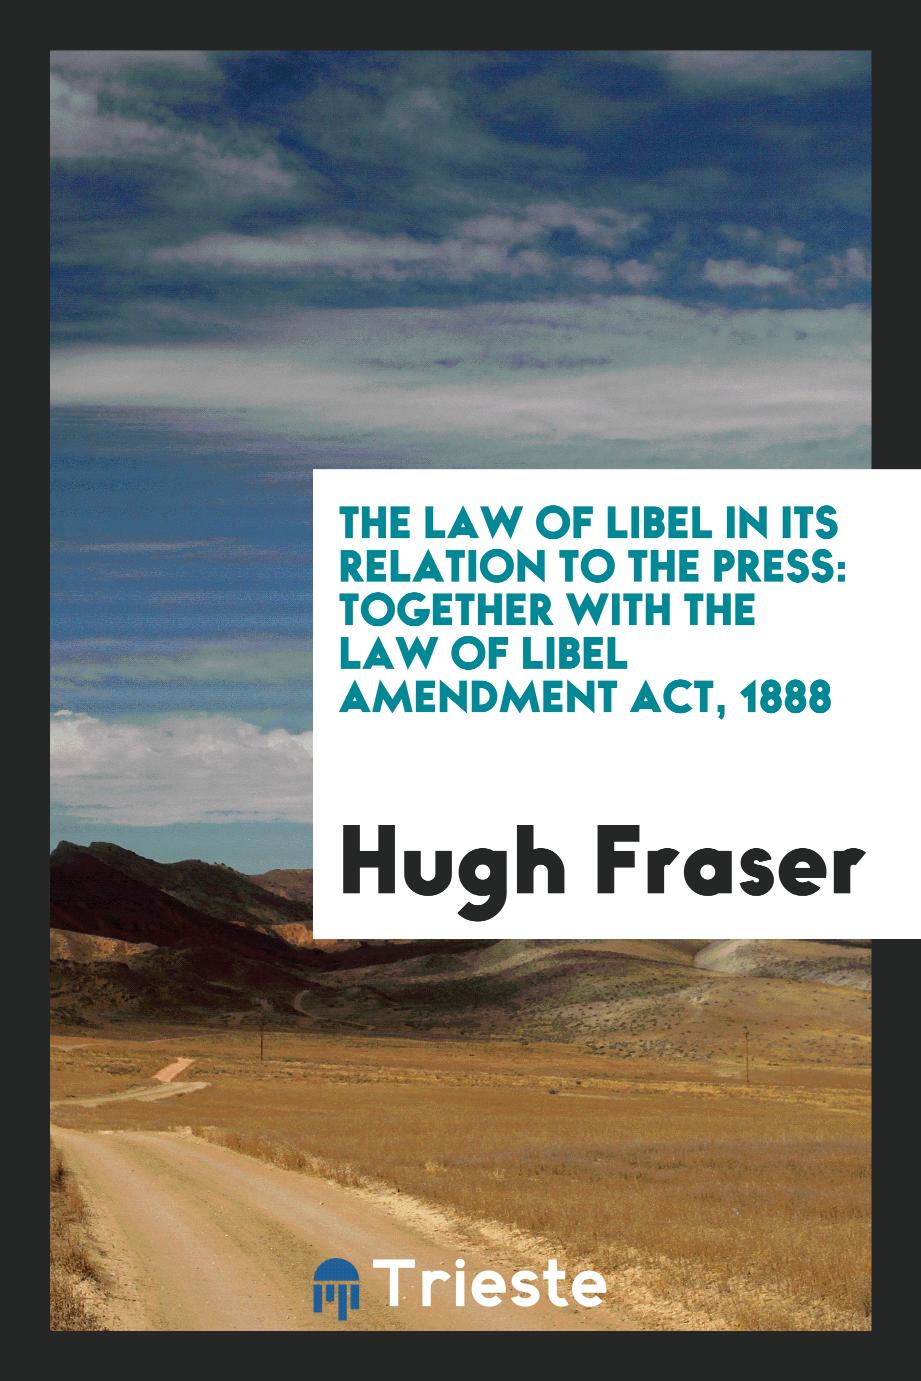 The Law of Libel in Its Relation to the Press: Together with the Law of Libel Amendment Act, 1888